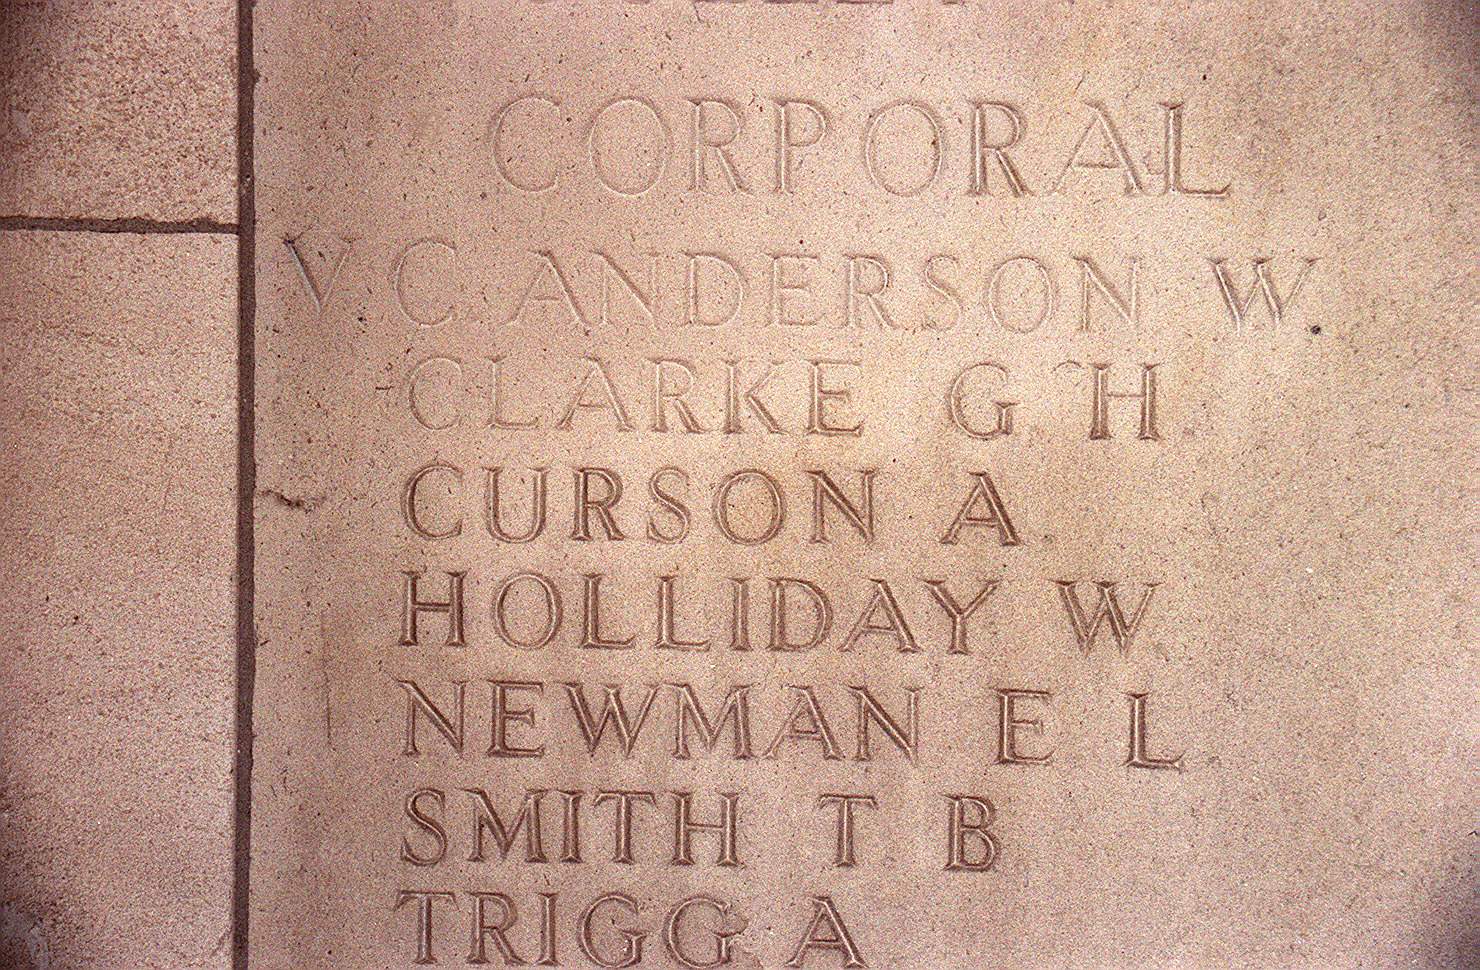 The panel with Corporal Arthur Curson's name carved on it